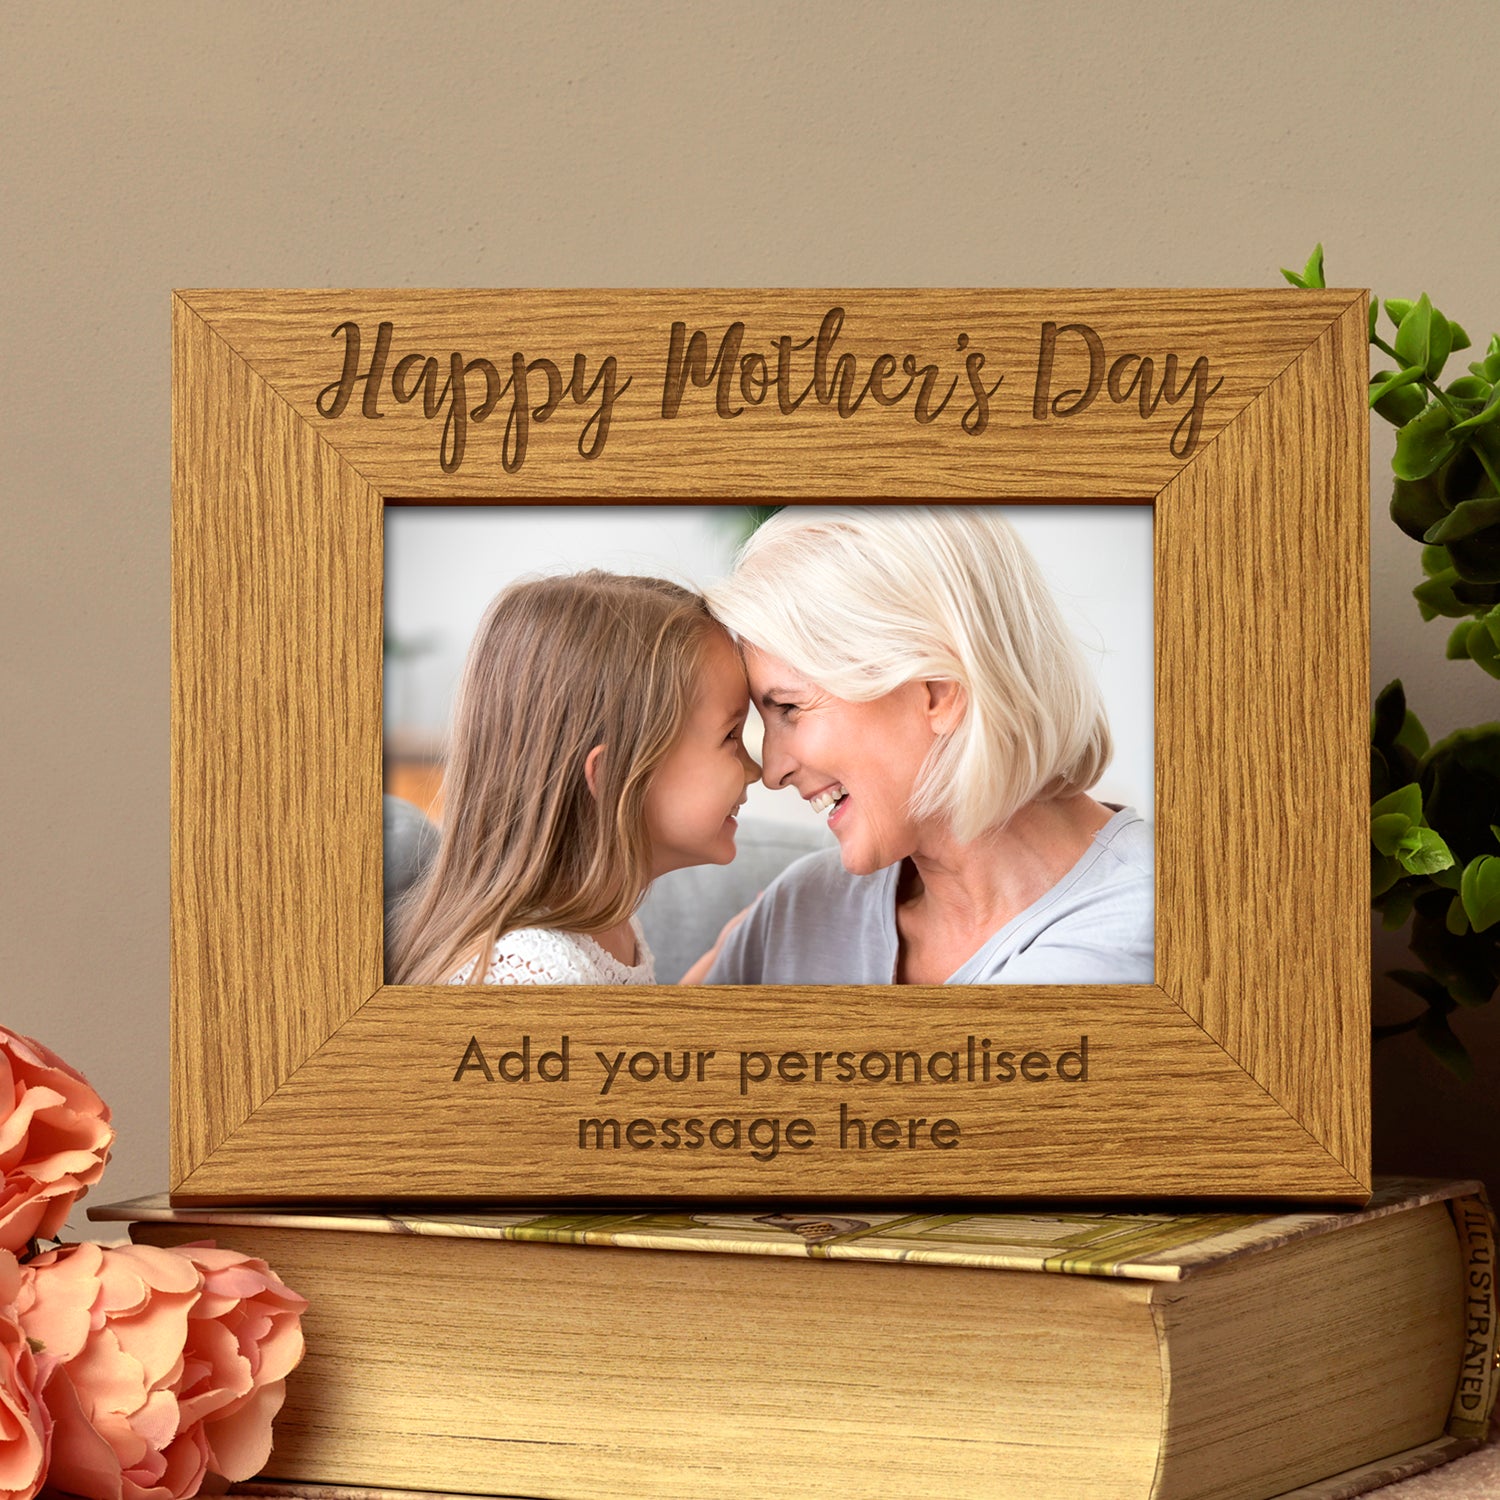 Personalised Happy Mothers Day Photo Frame Gift - ukgiftstoreonline